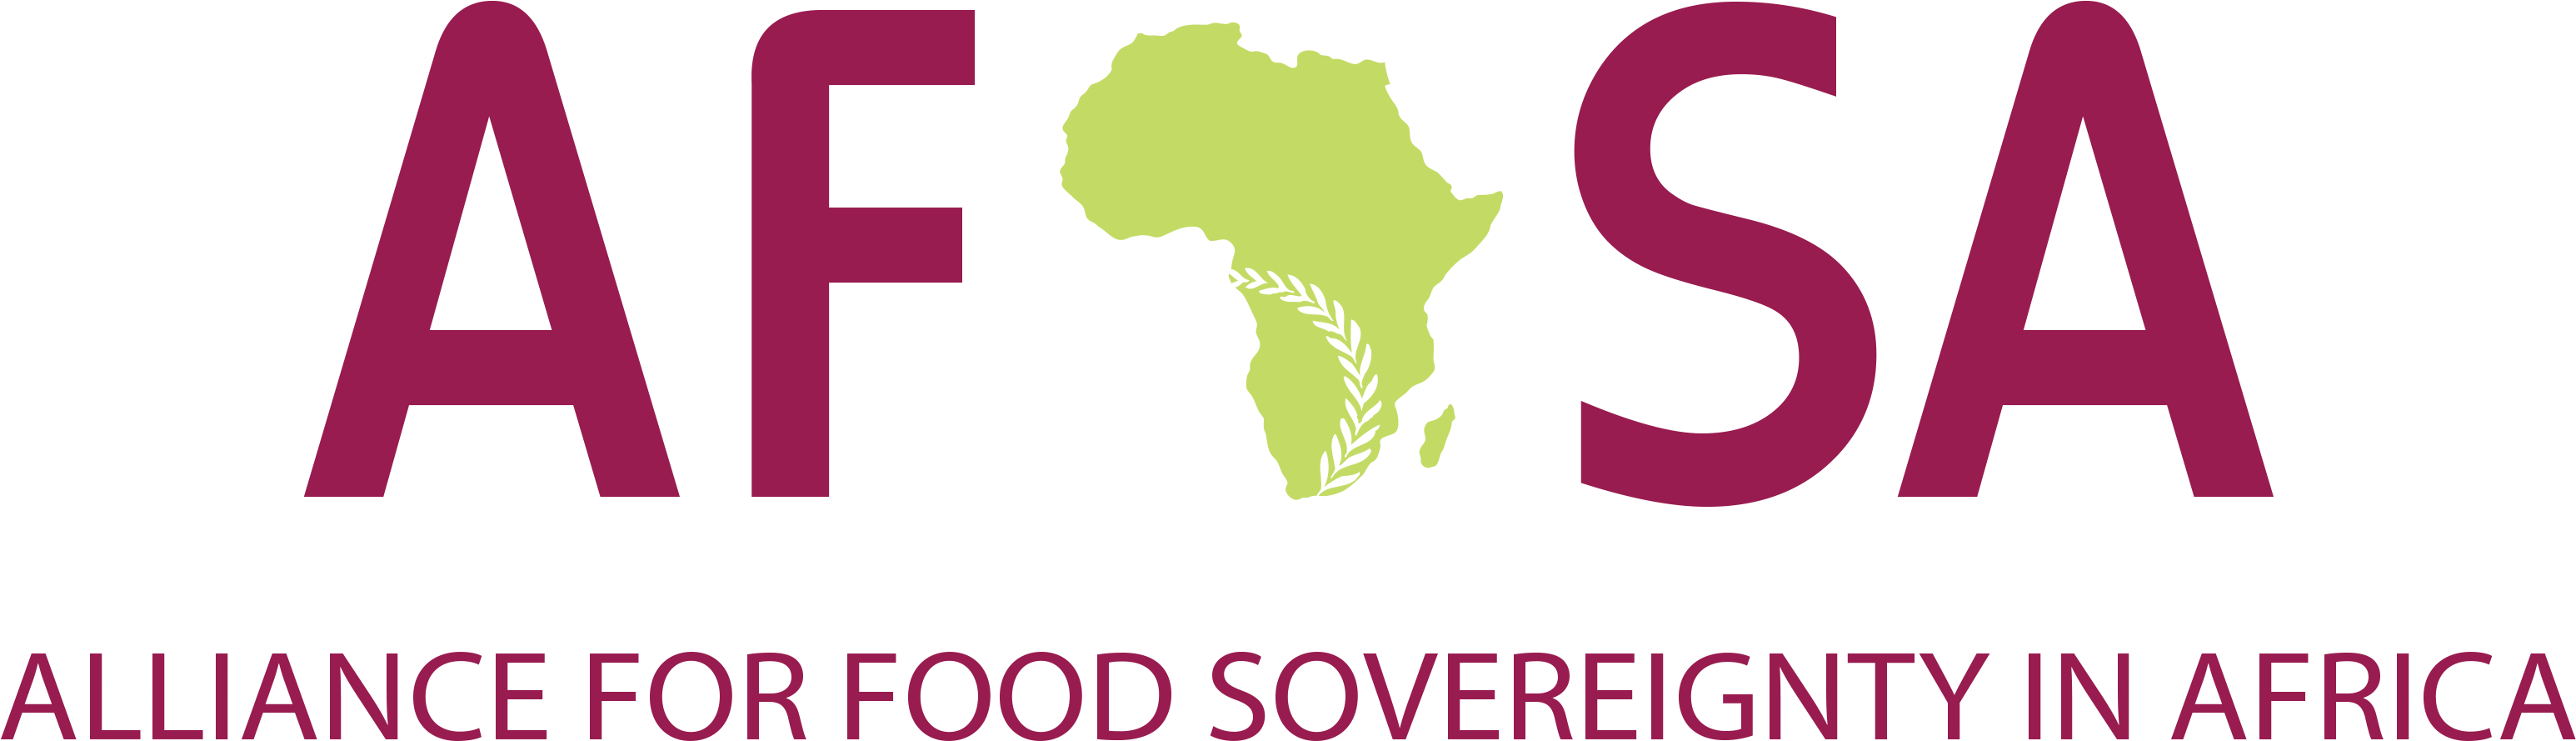 Alliance For Food Sovereignty In Africa Afsa - Alliance For Food Sovereignty In Africa (3412x1186)